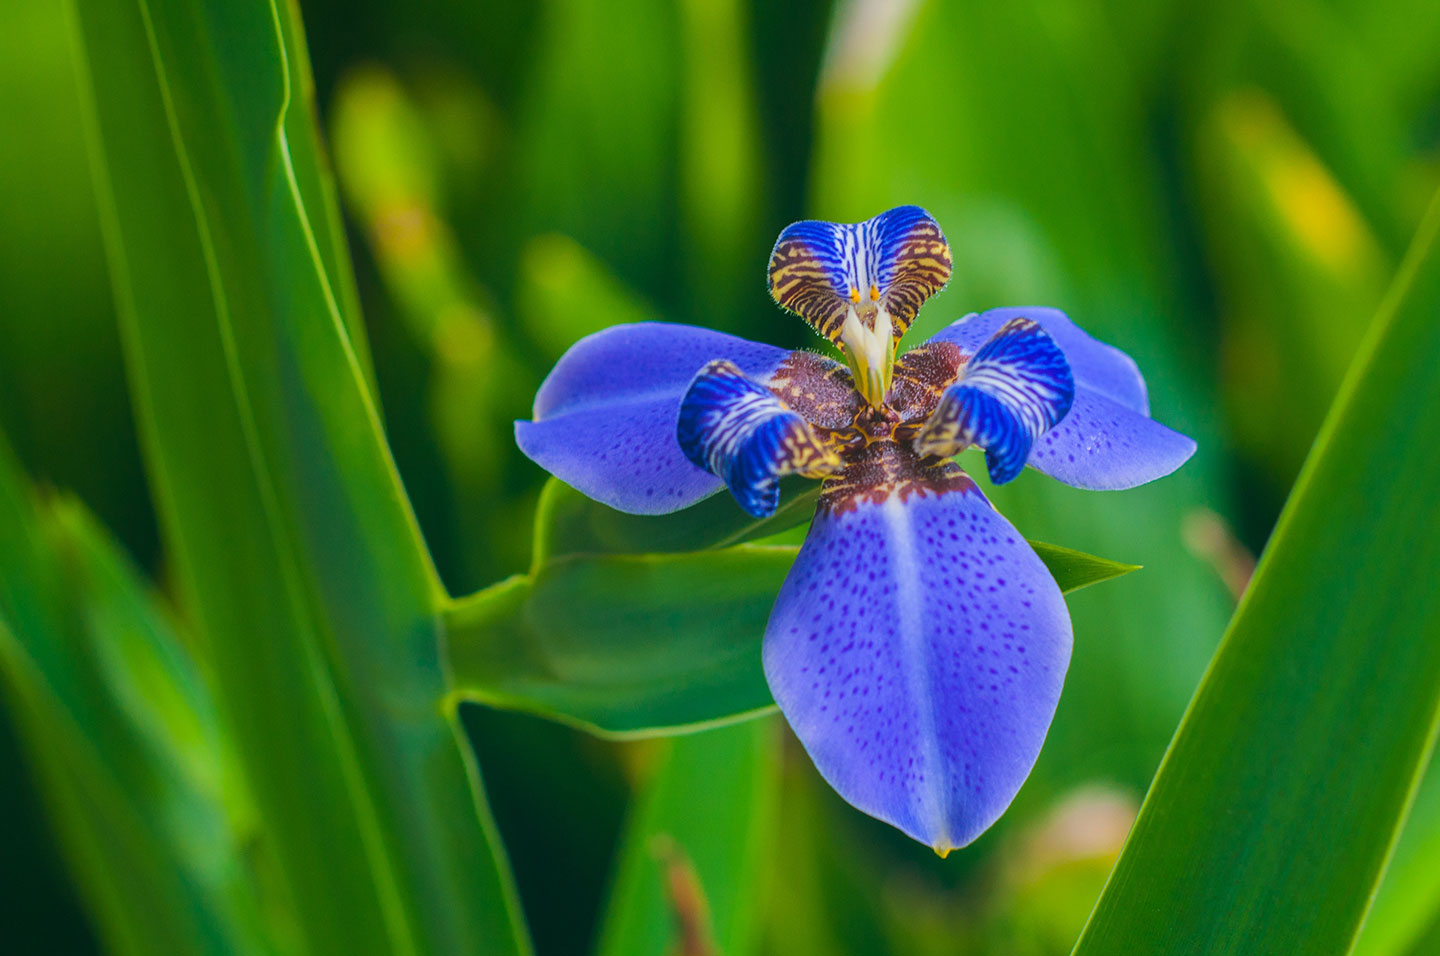 A single Iris flower surrounded by leaves